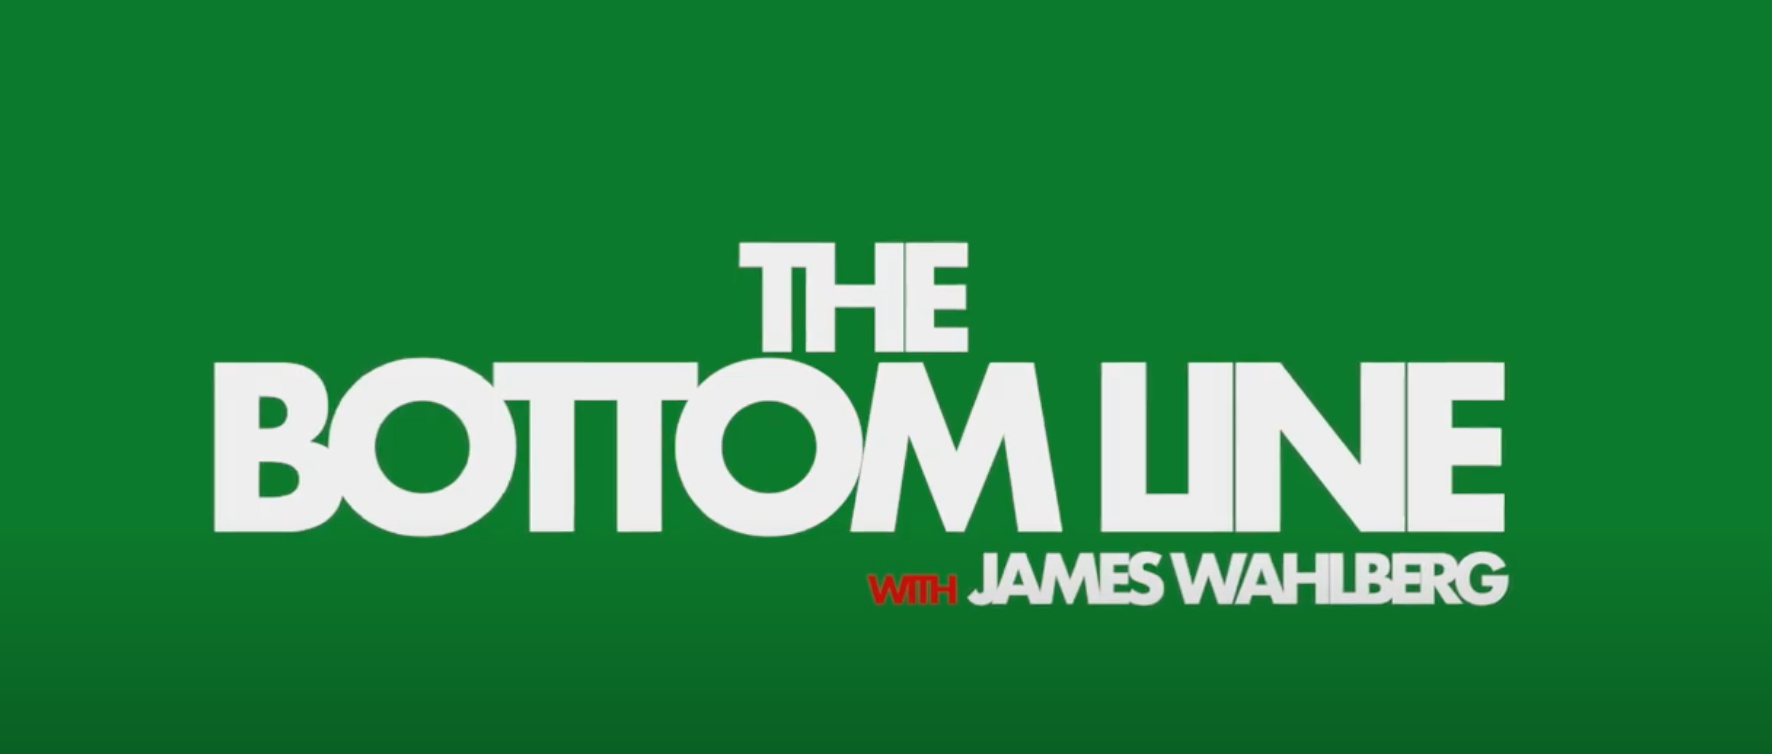 VIDEO: “The Bottom Line” with James Wahlberg Featuring Dan Shneider (Part 2)